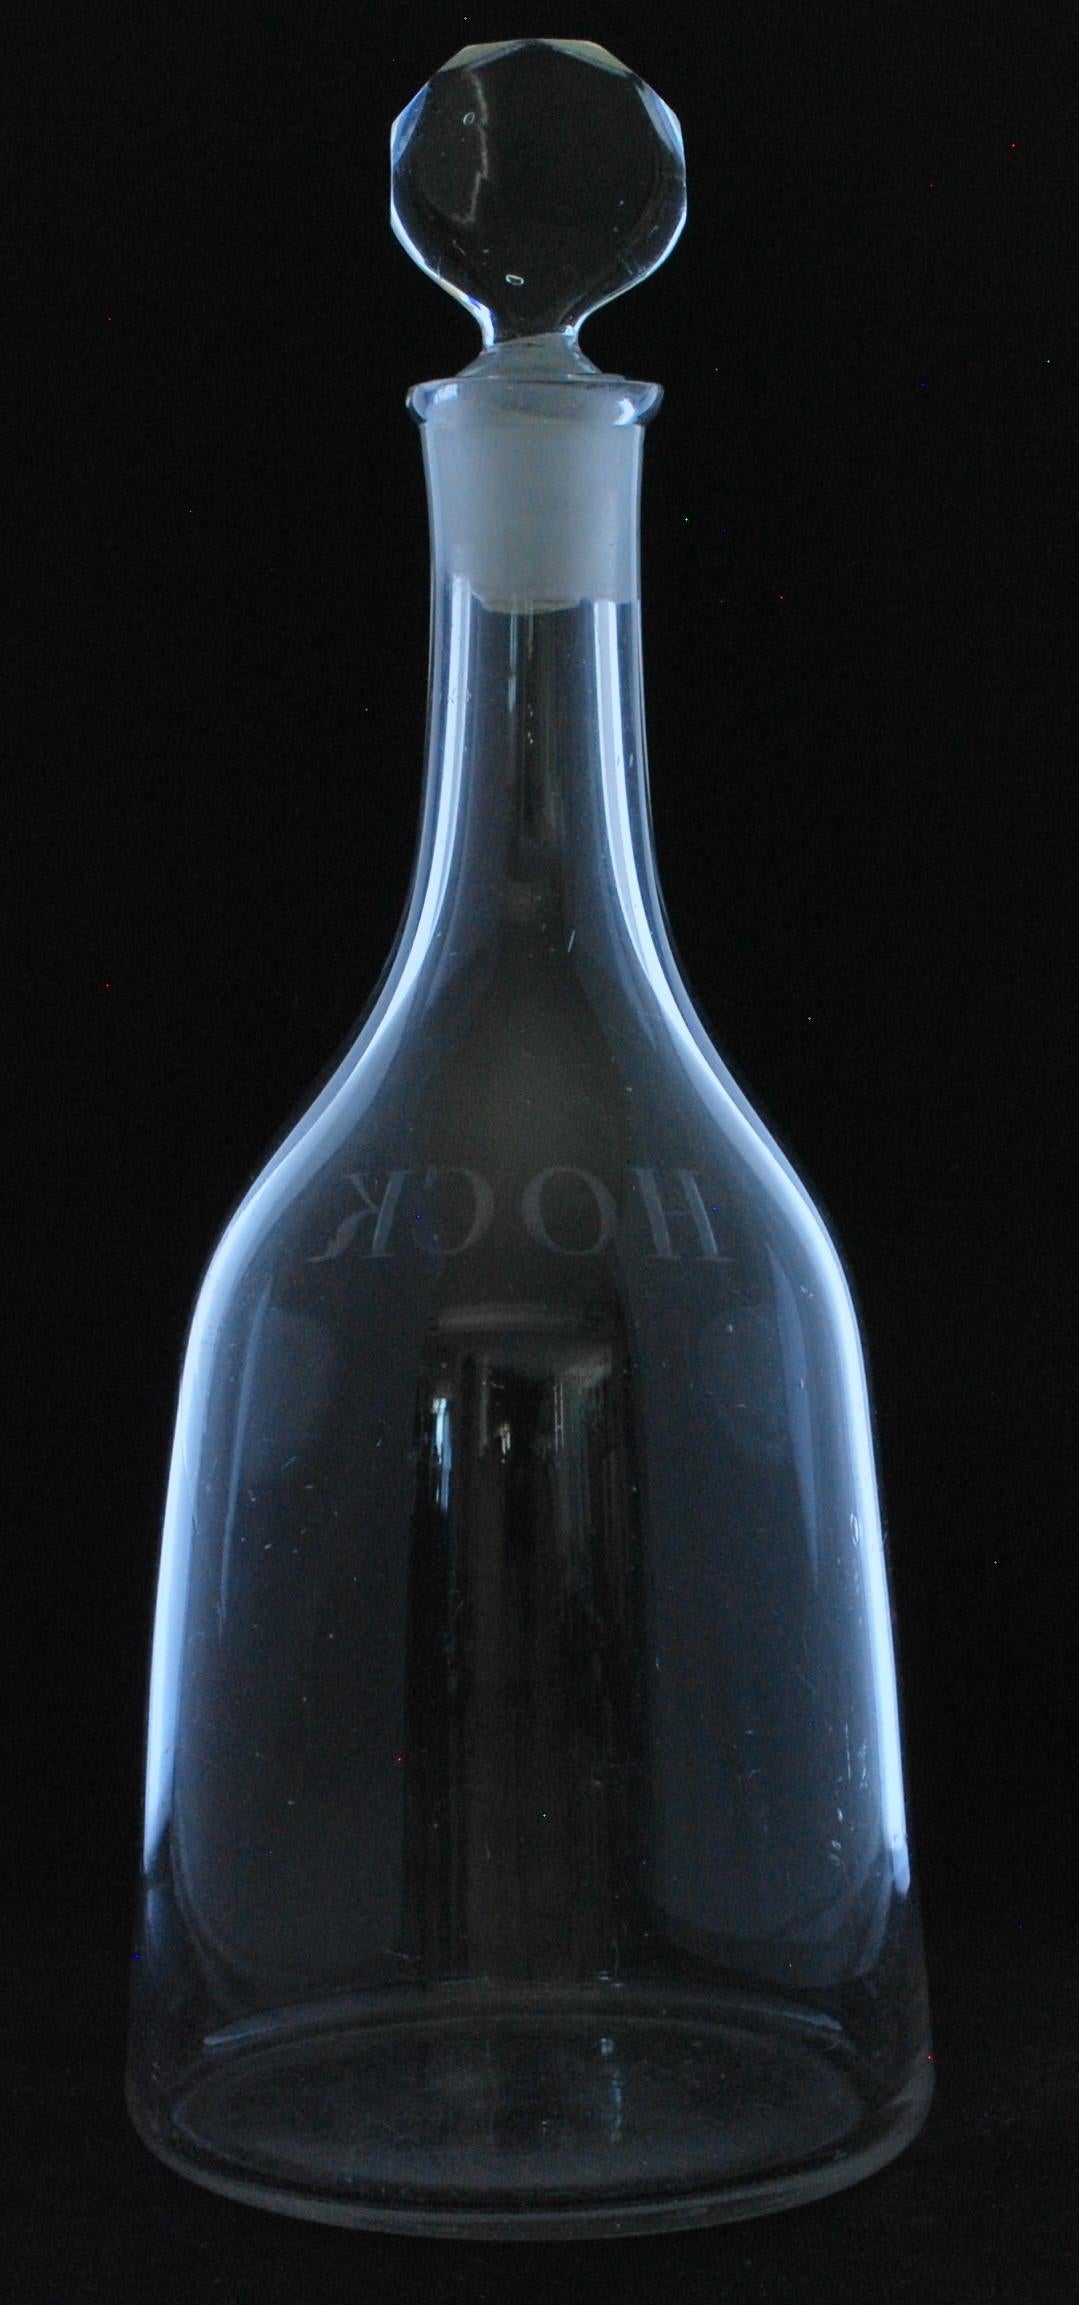 A very fine sugar-loaf shaped decanter, engraved for Hock, a name for any German white wine at the time.